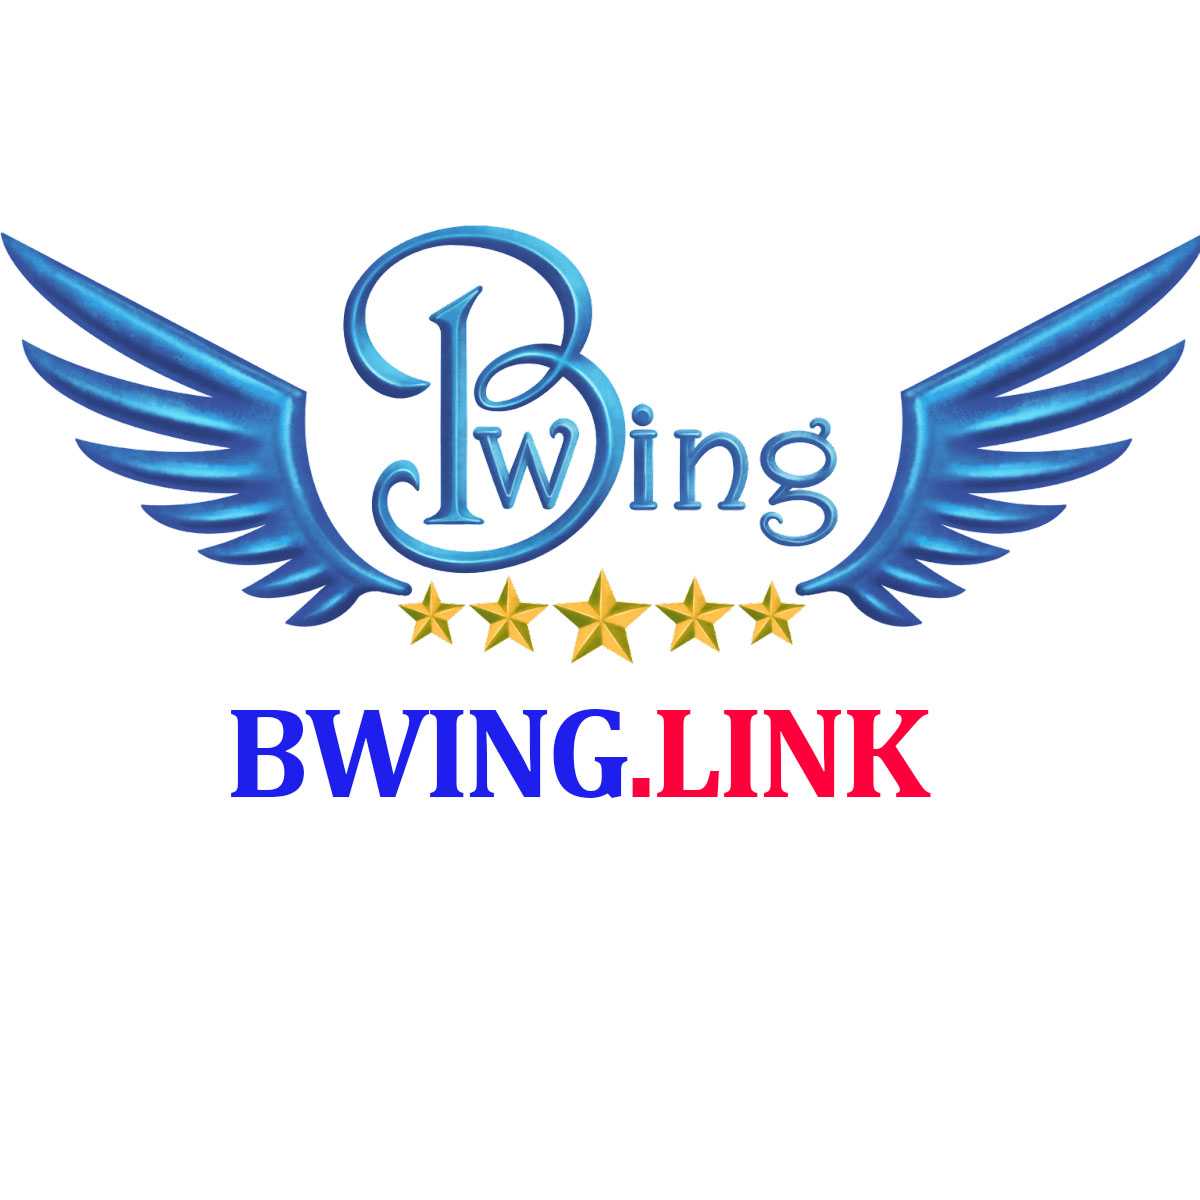 Bwing Link